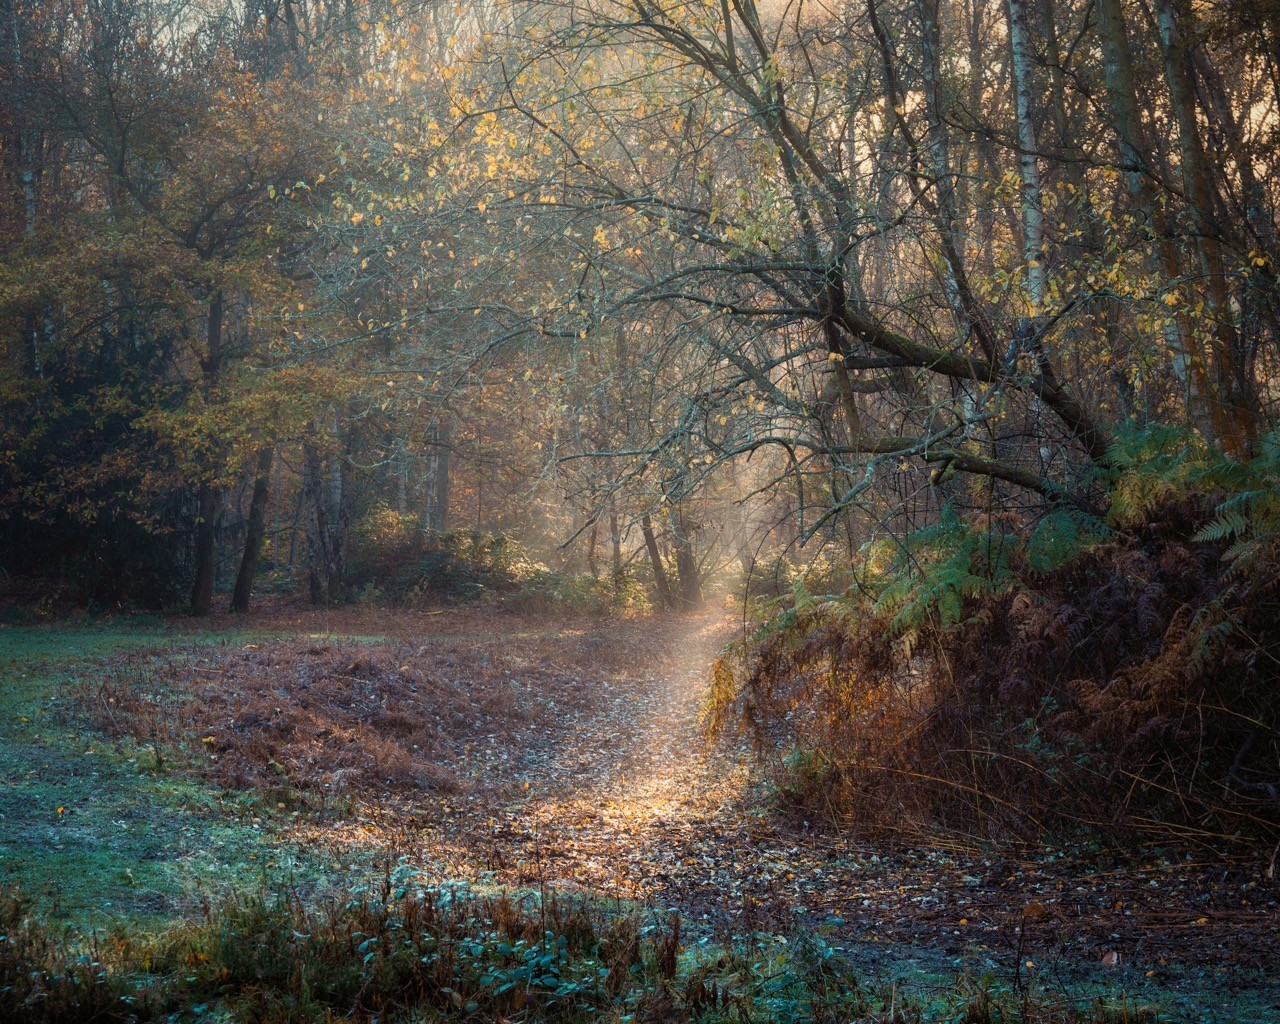 A quiet woodland scene with a bit of early morning forest magic catching an overhanging tree.